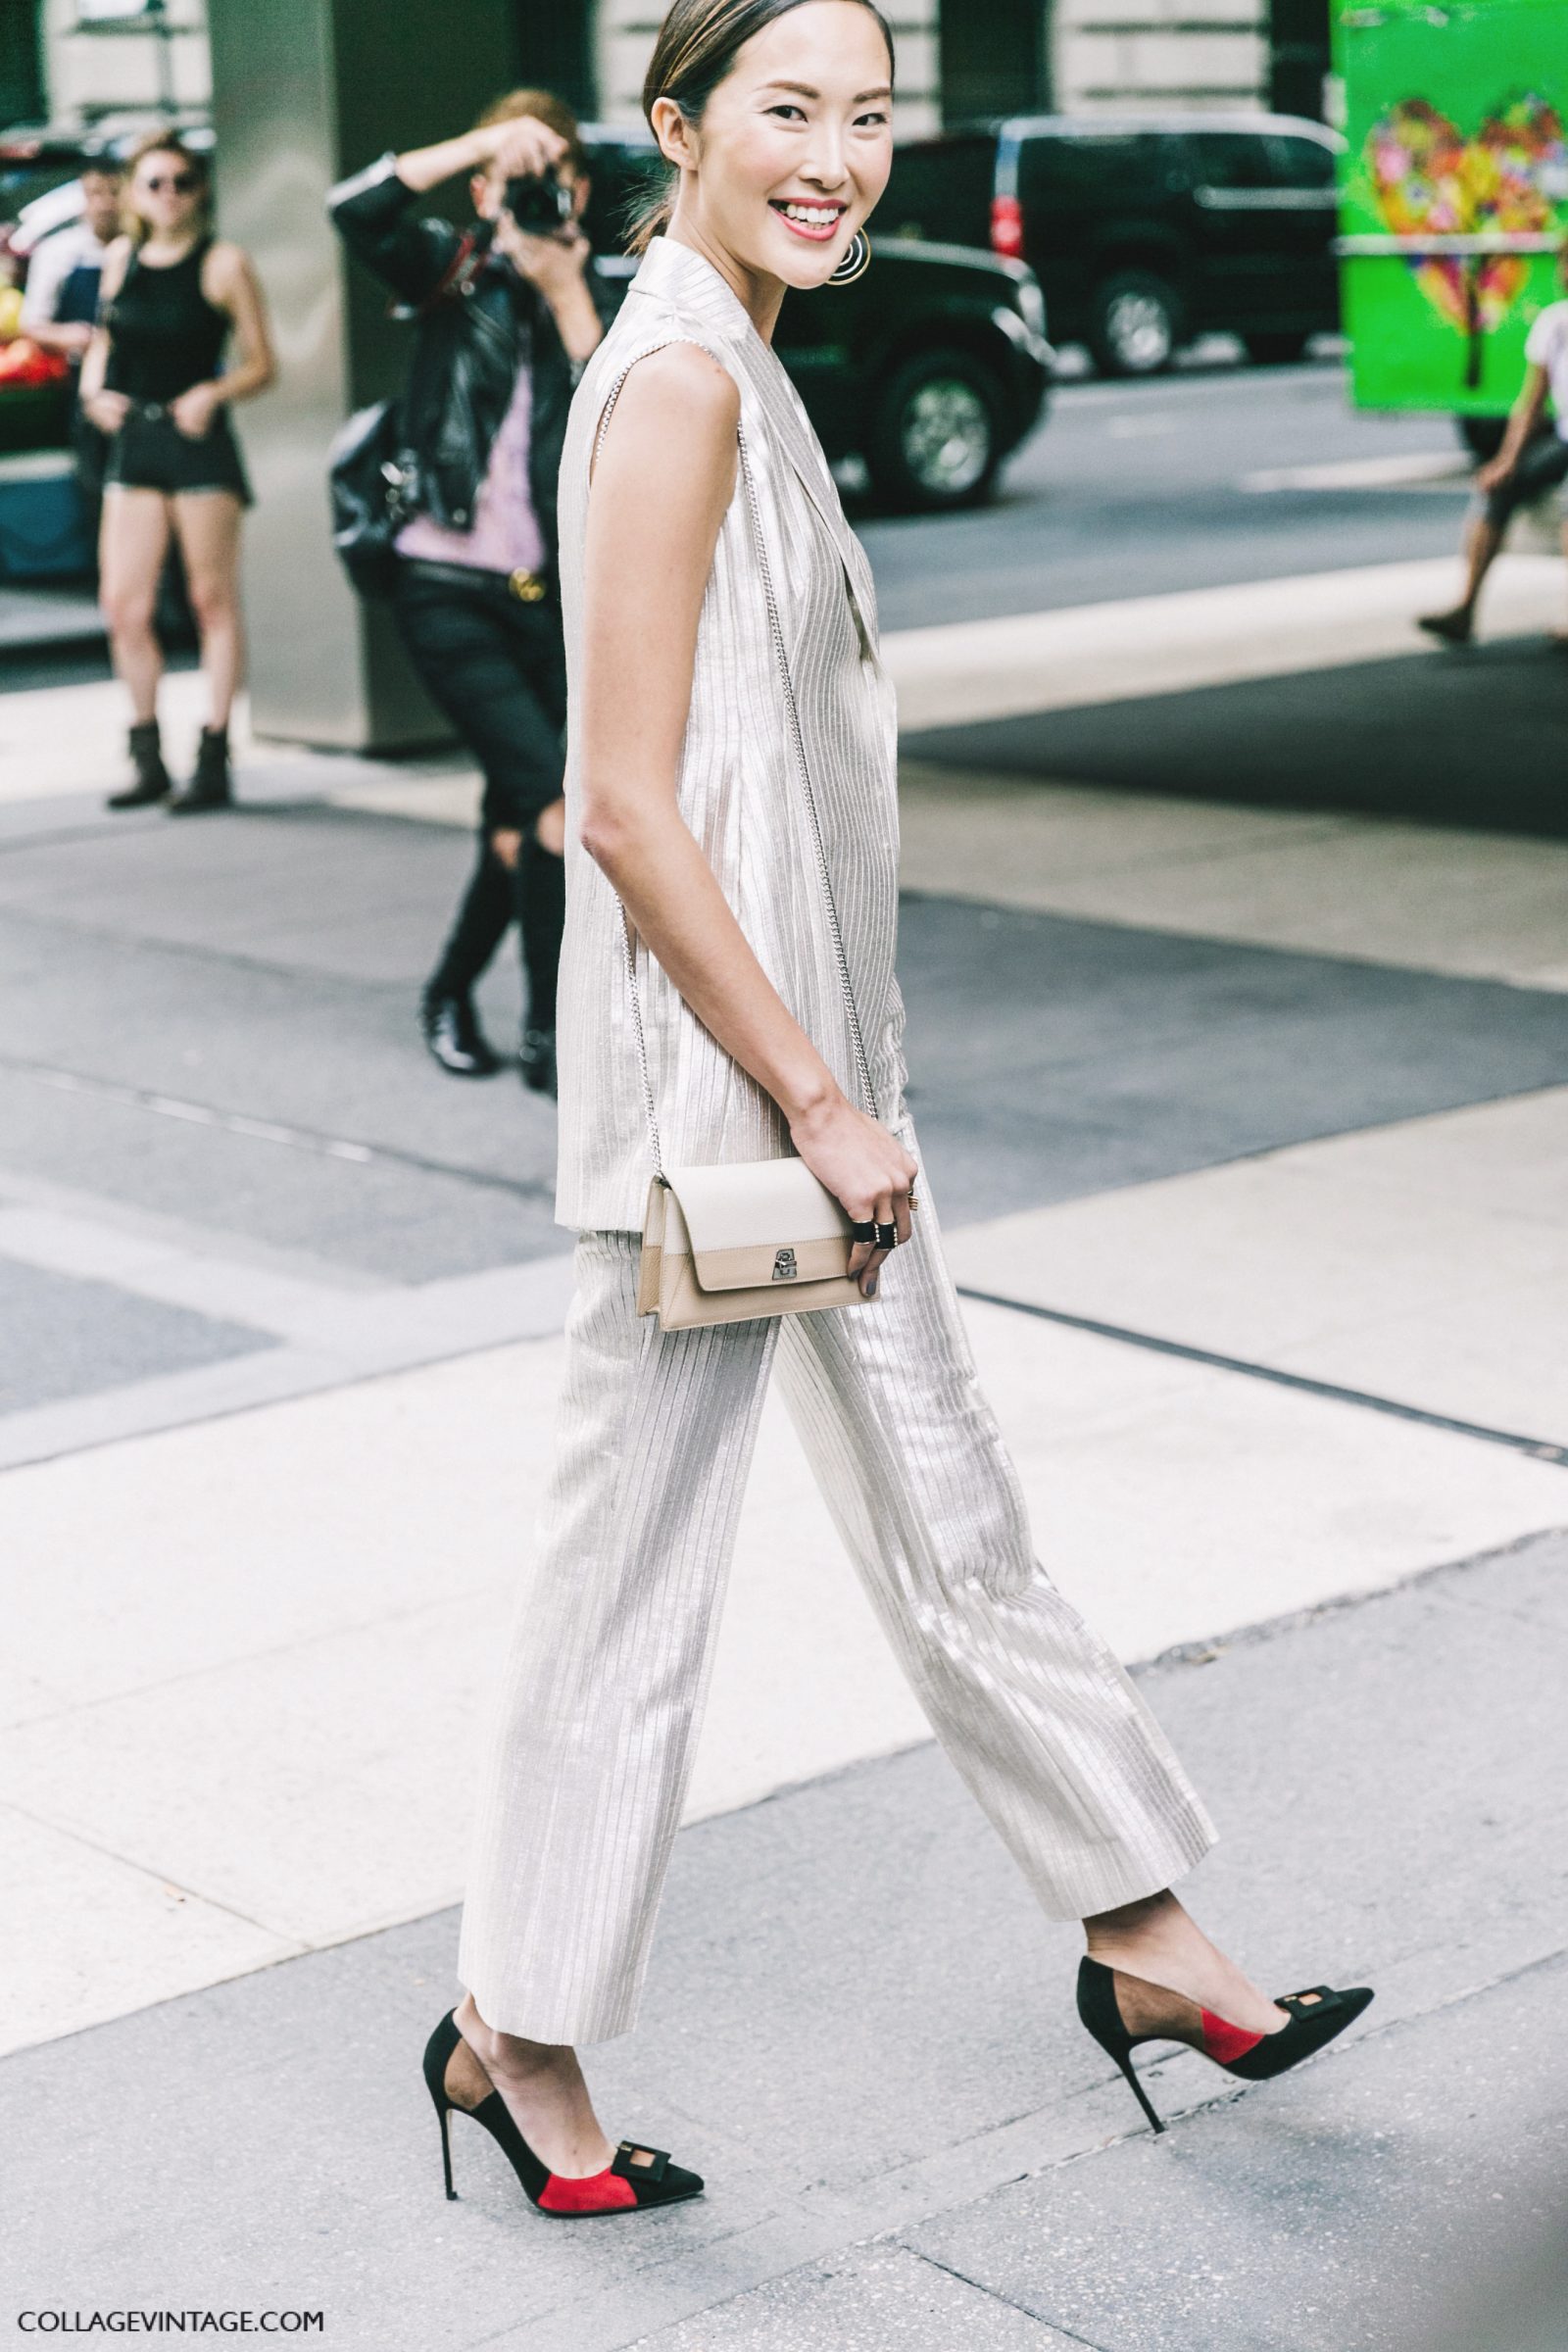 nyfw-new_york_fashion_week_ss17-street_style-outfits-collage_vintage-chrisell-lim